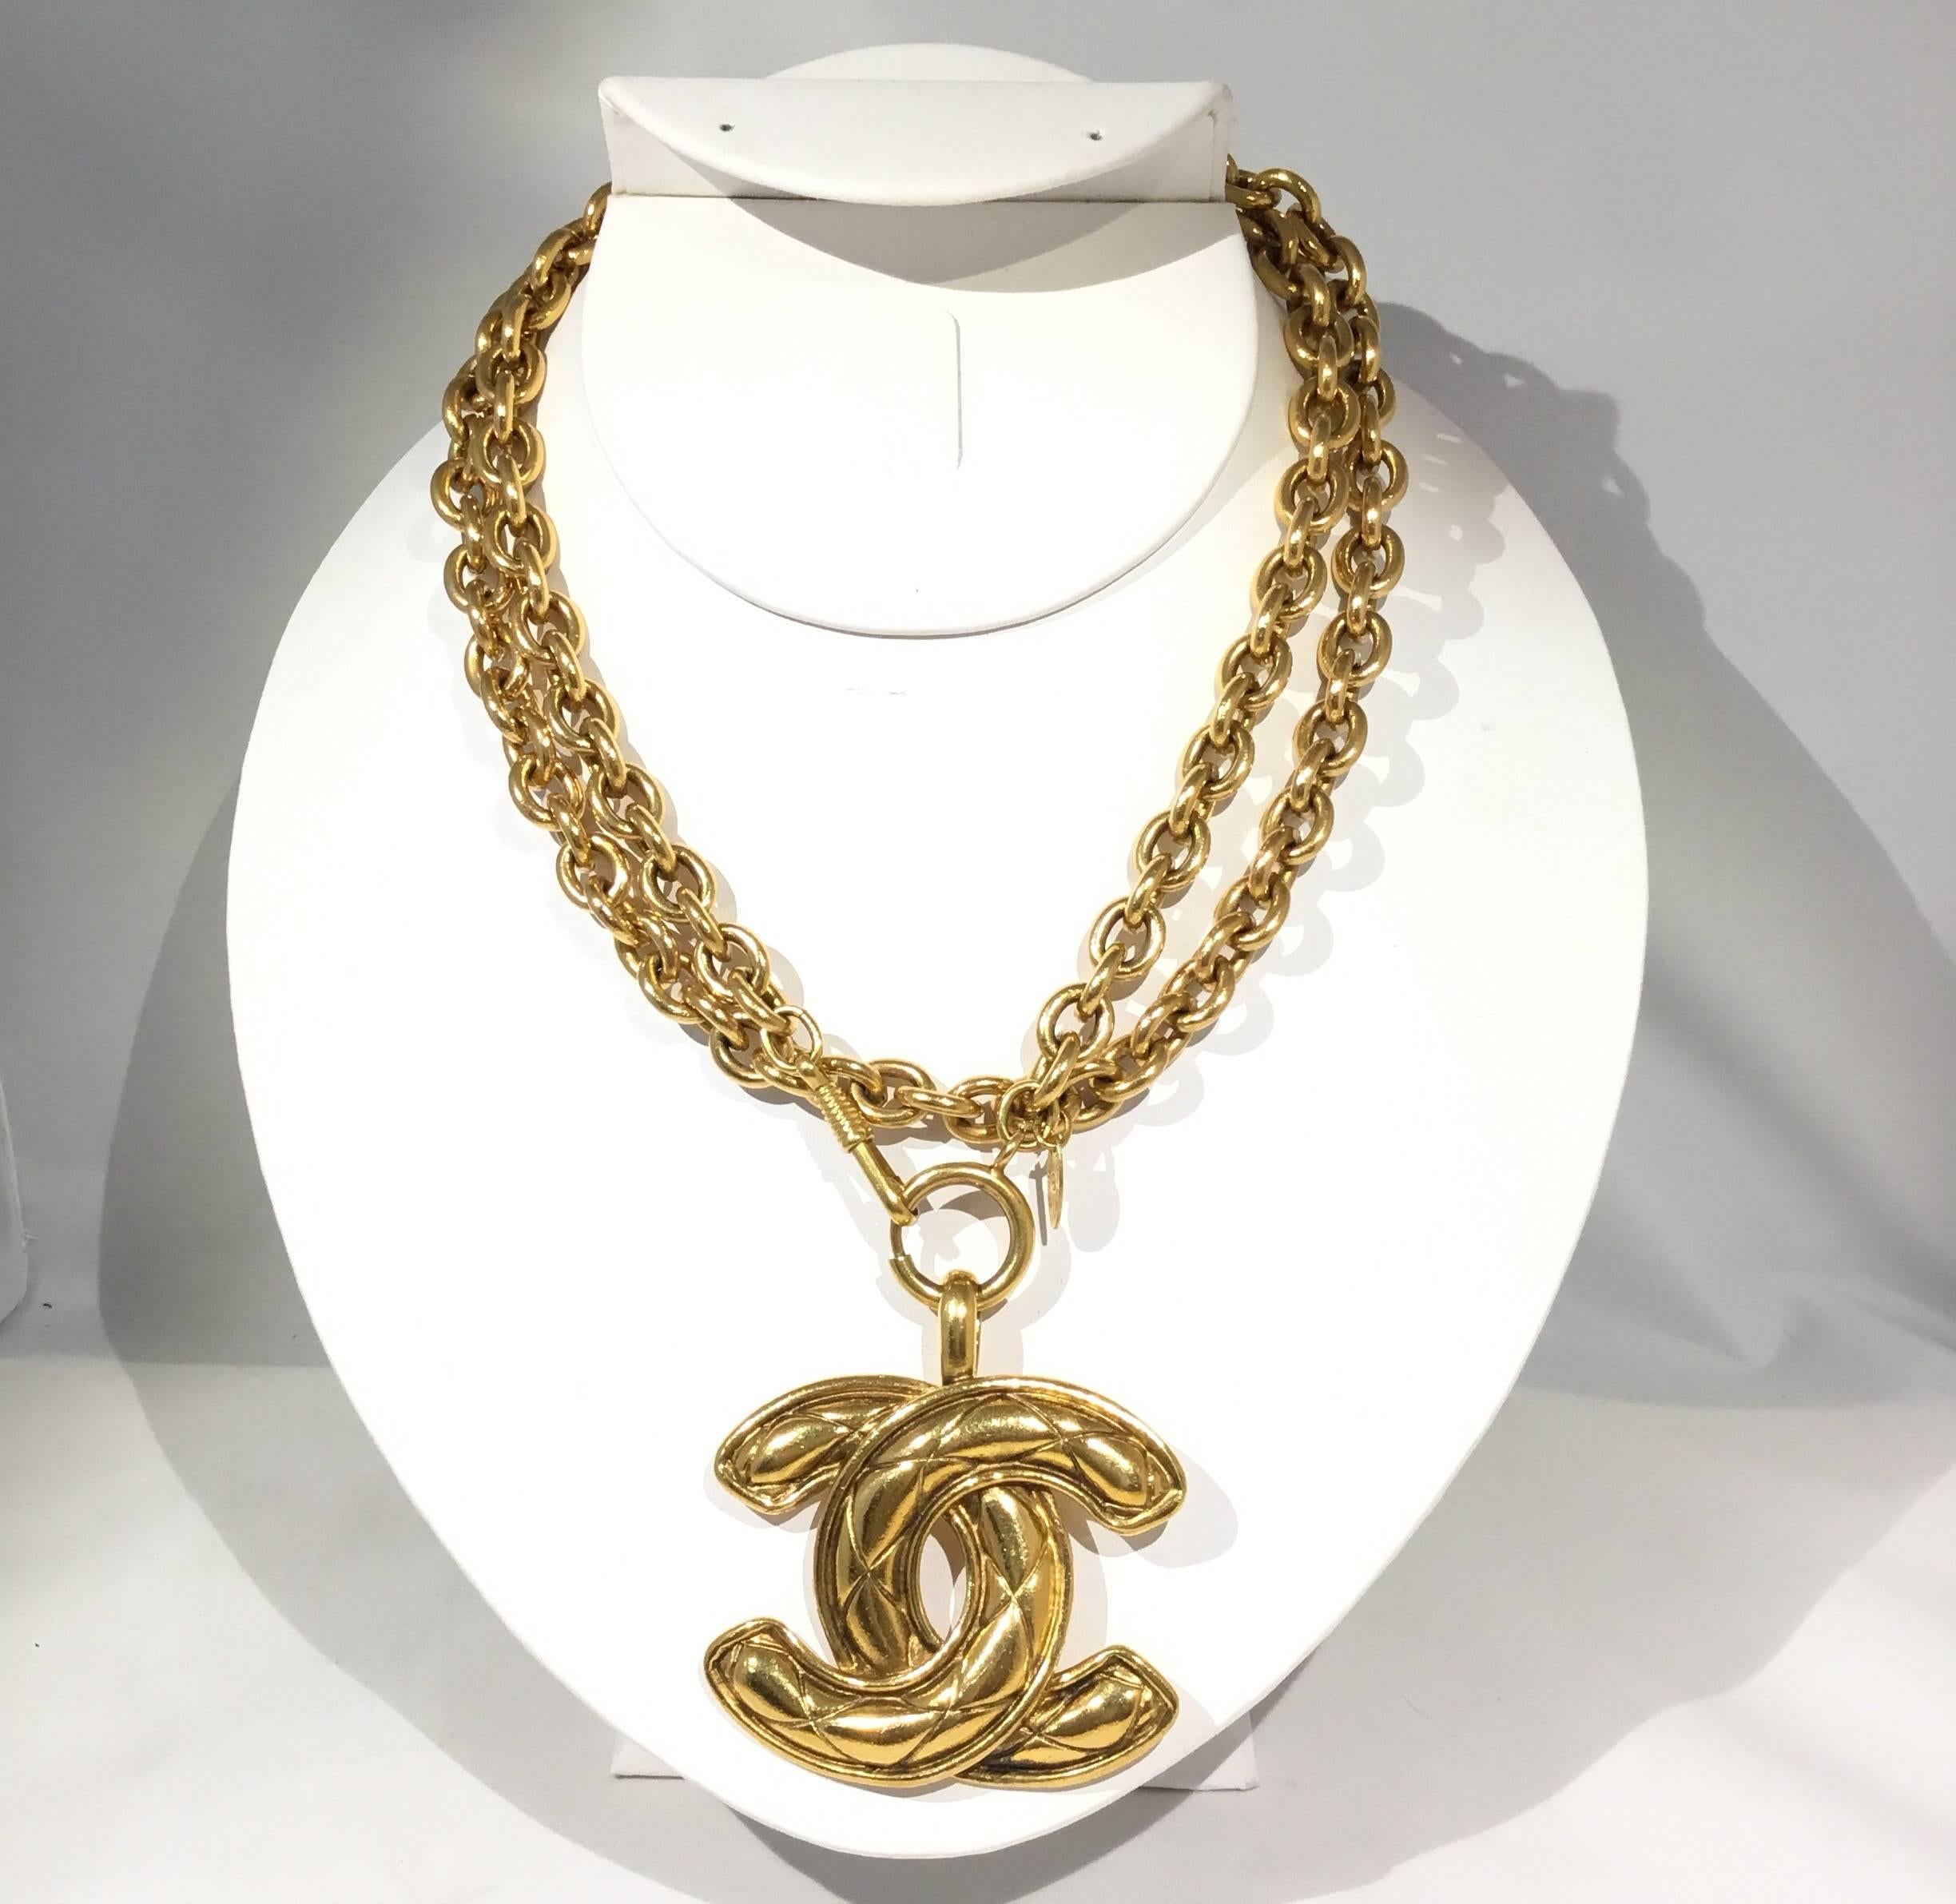 Chanel vintage chain  necklace features a large signature CC quilted Pendant and a clip clasp closure. Made in France. 

Length 33''
Drop 19”
Pendant 2” x 2.5”